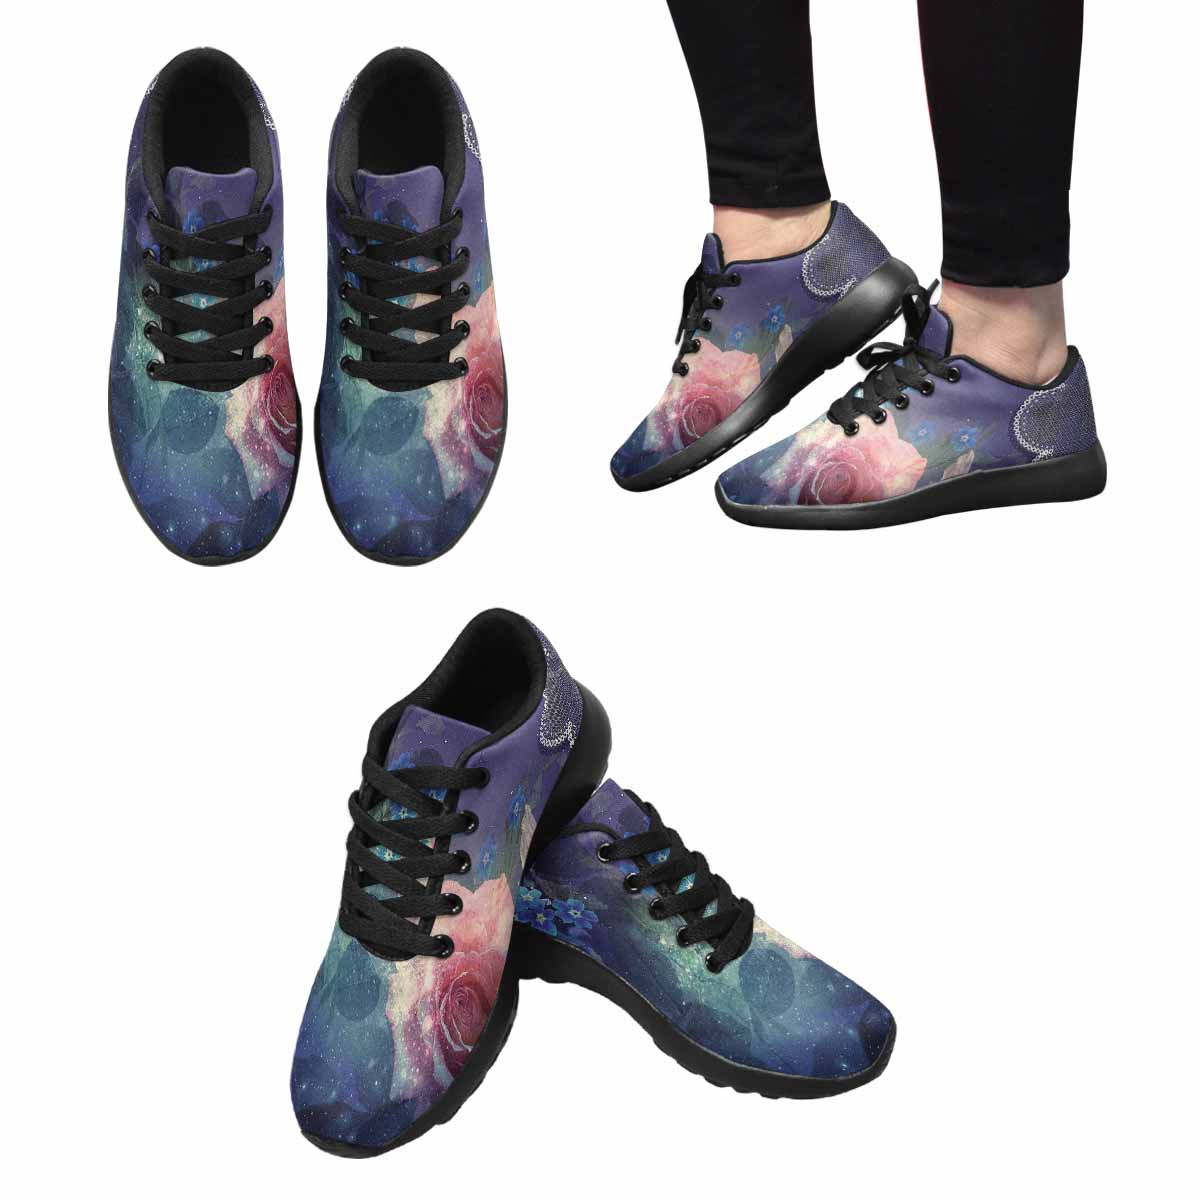 Victorian lace print, womens cute casual or running sneakers, shoes, design 02